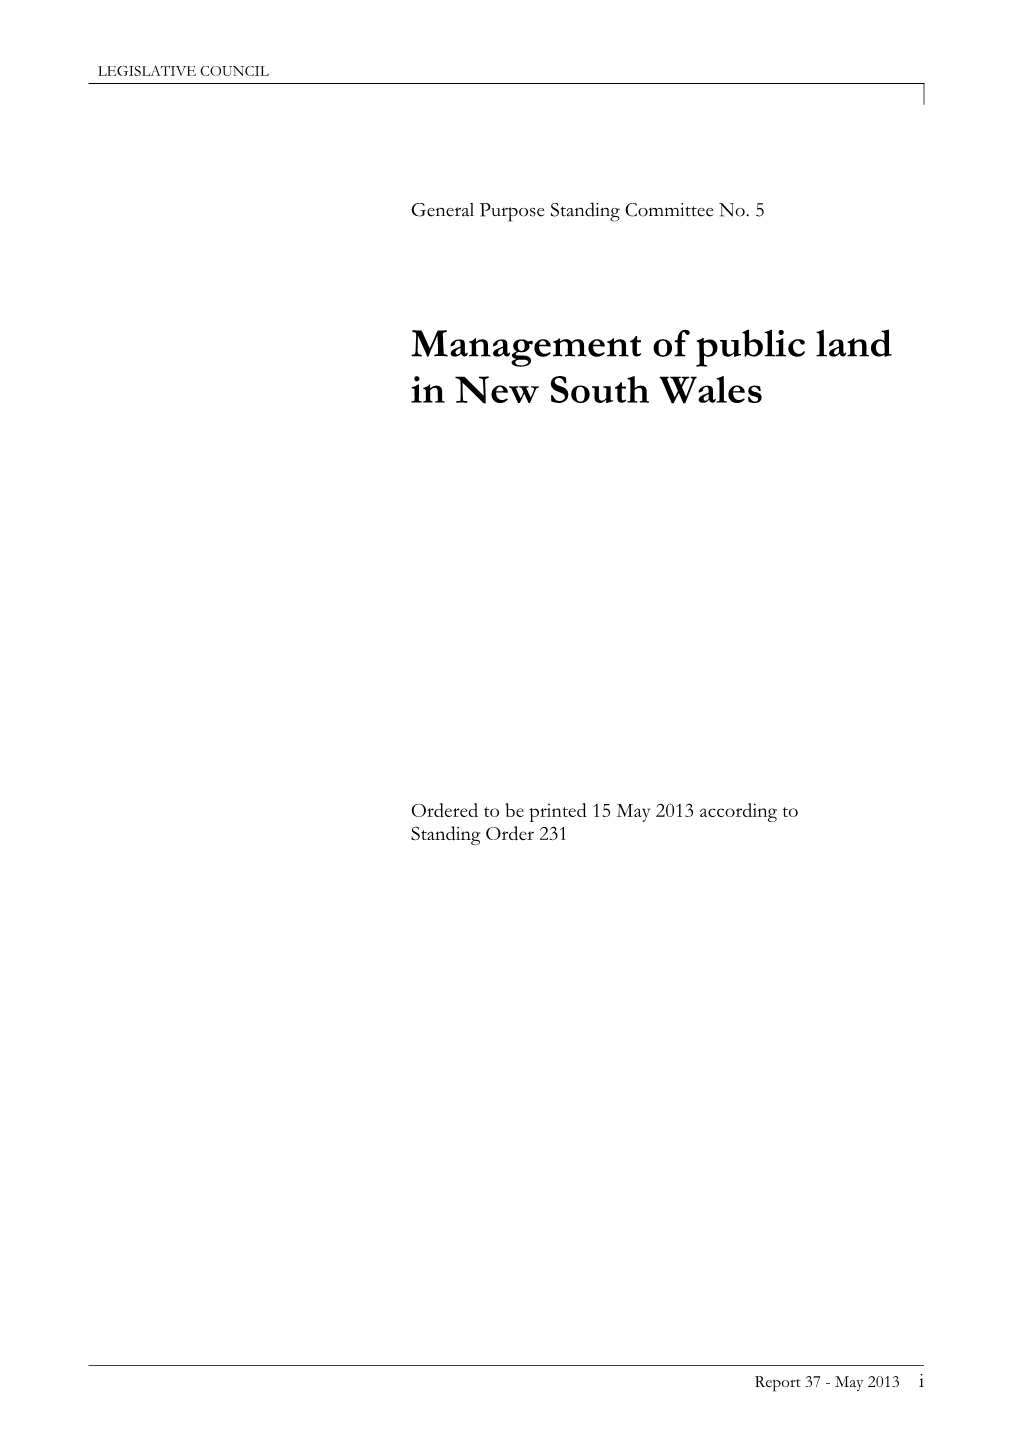 Management of Public Land in New South Wales